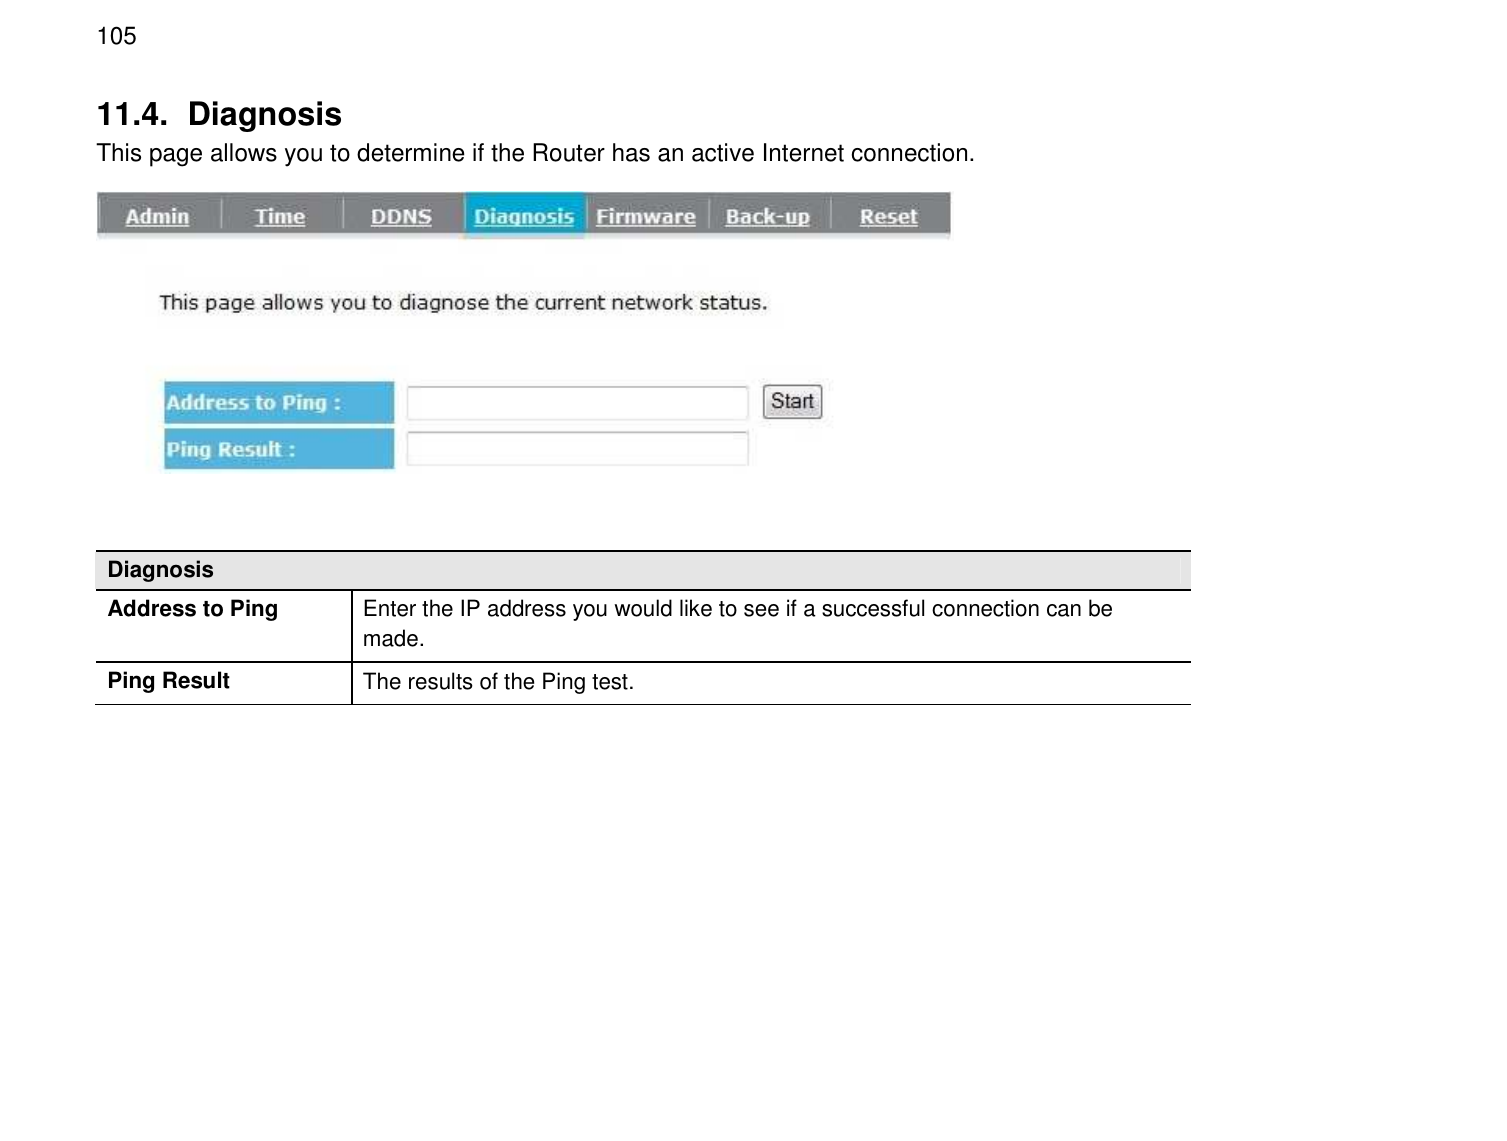  105 11.4.  Diagnosis This page allows you to determine if the Router has an active Internet connection.   Diagnosis Address to Ping  Enter the IP address you would like to see if a successful connection can be made. Ping Result  The results of the Ping test.  